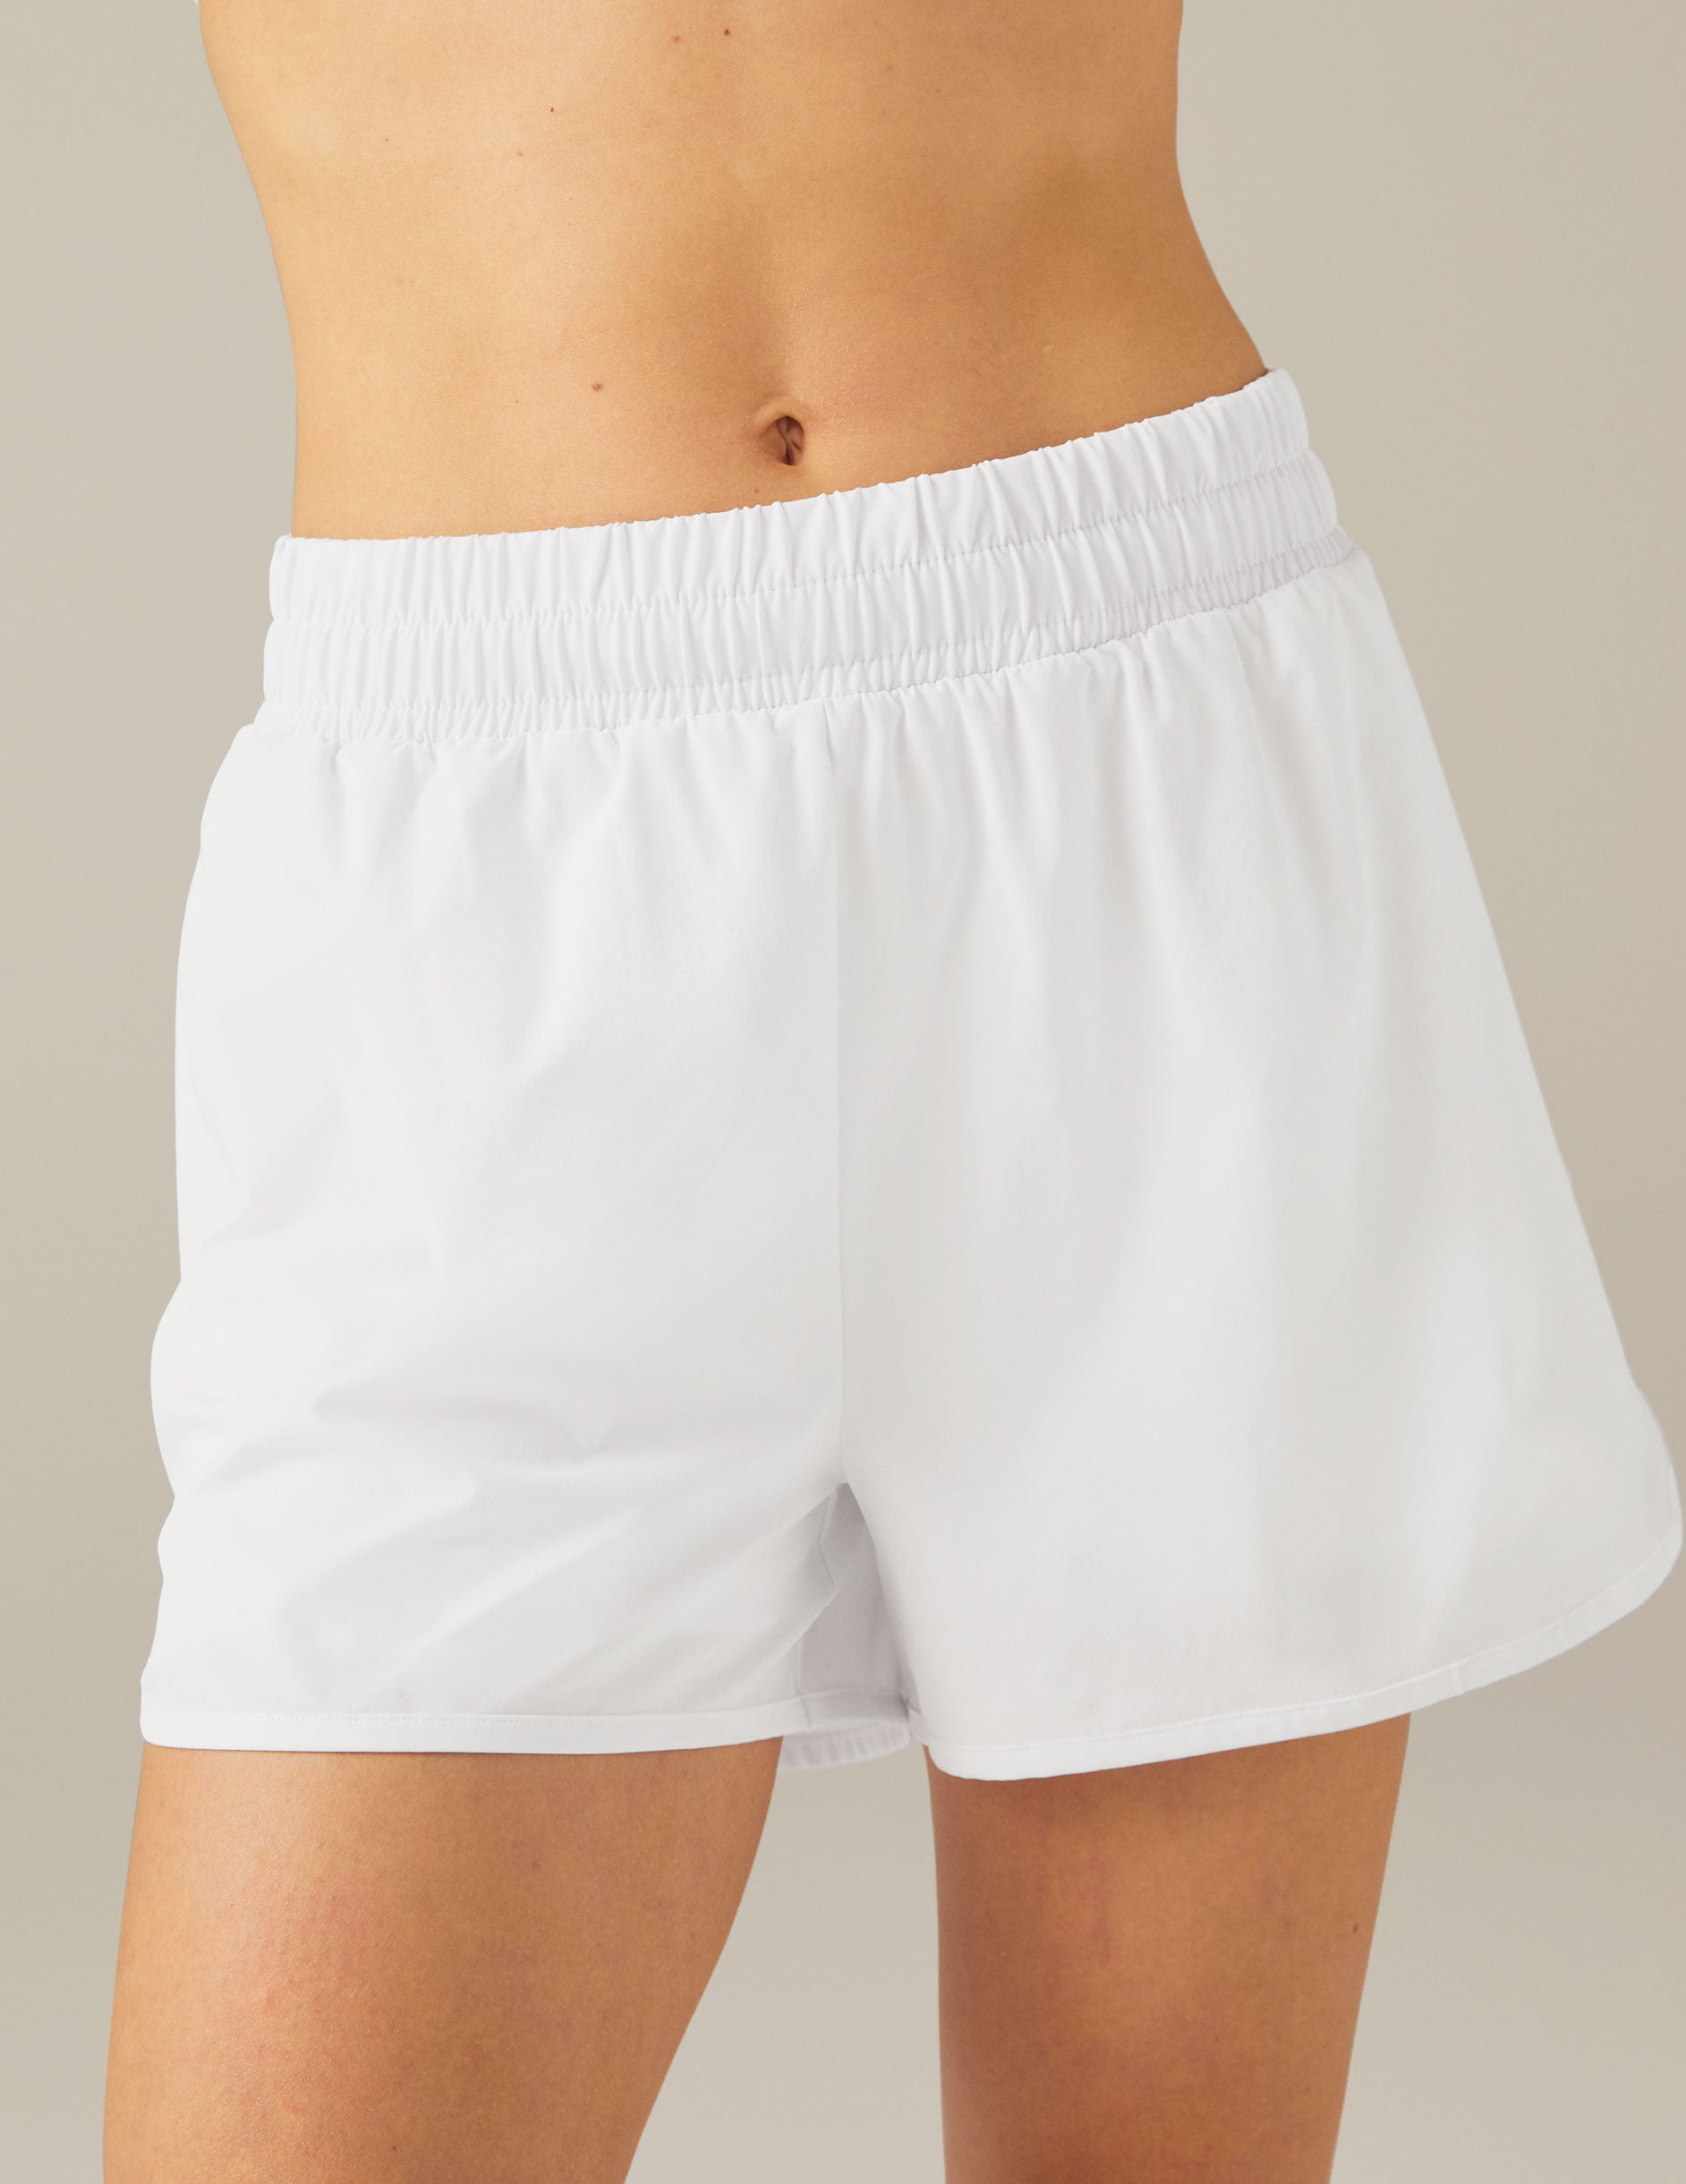 white shorts with seamless short detail inside with pockets